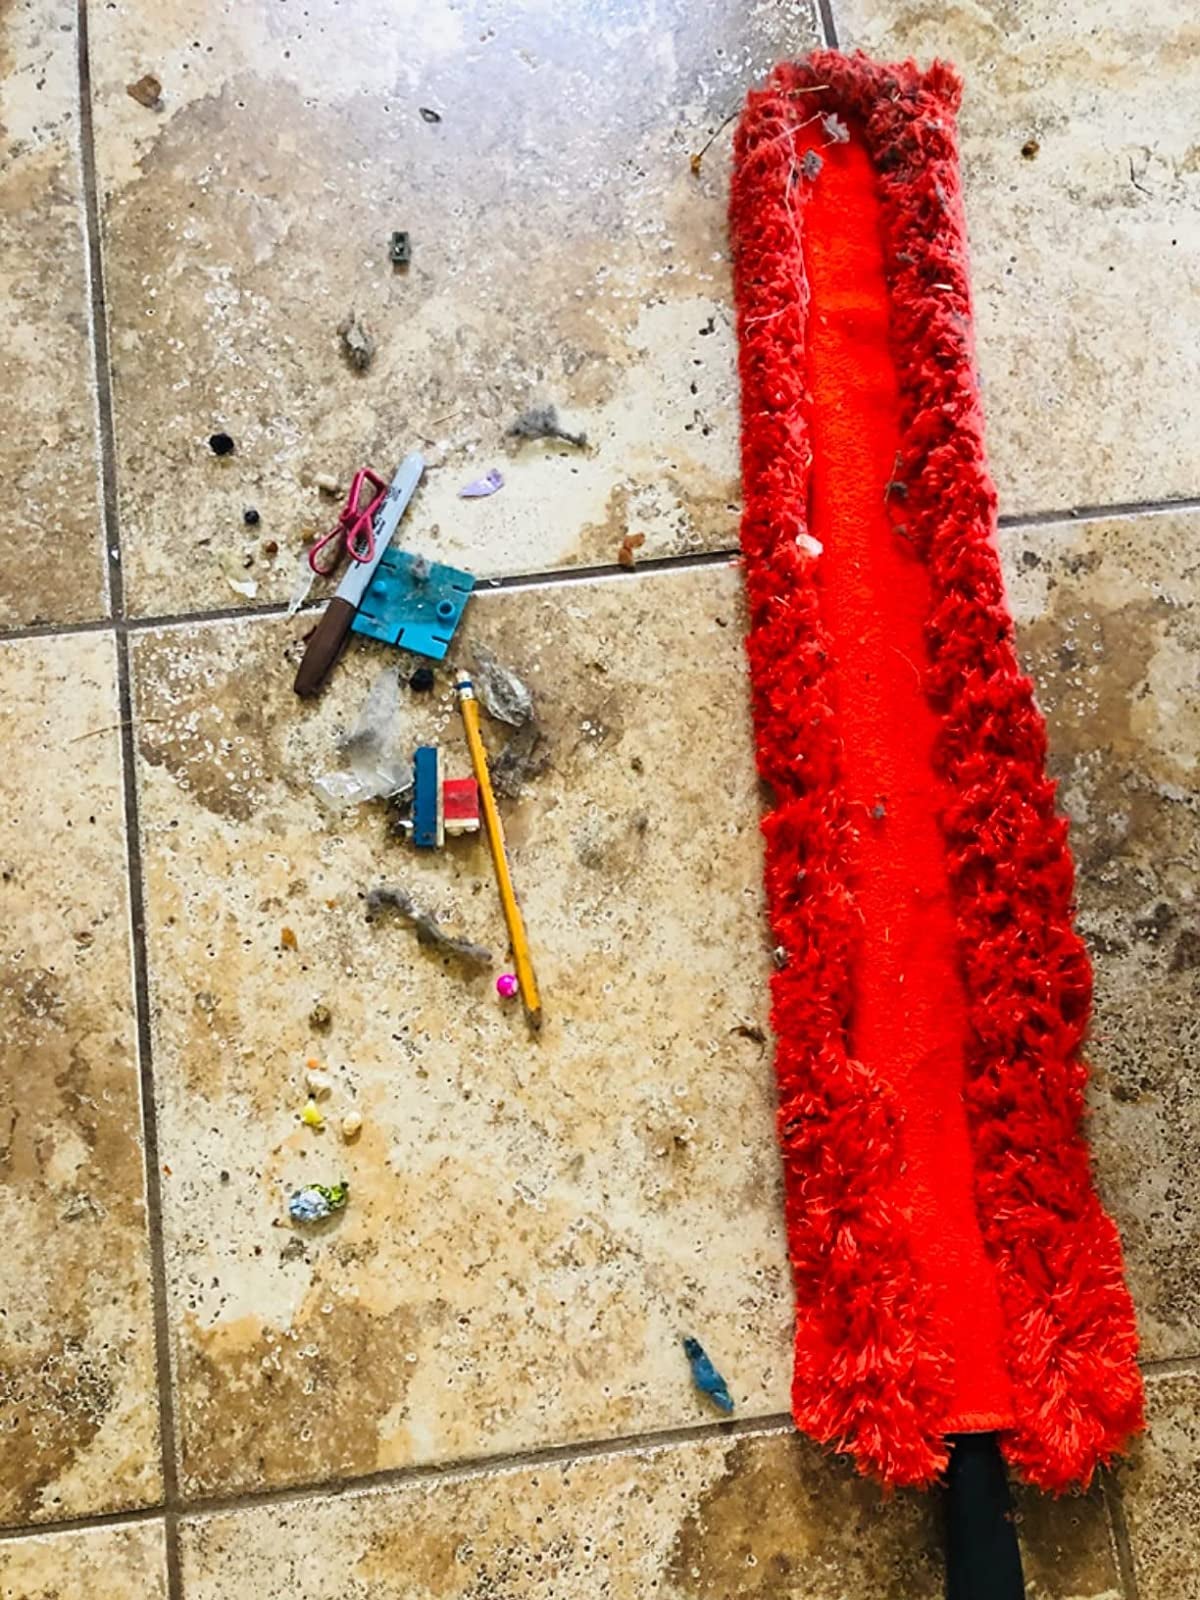 a reviewer photo of the red duster next to a pile of dust and random objects retrieved from under an appliance 